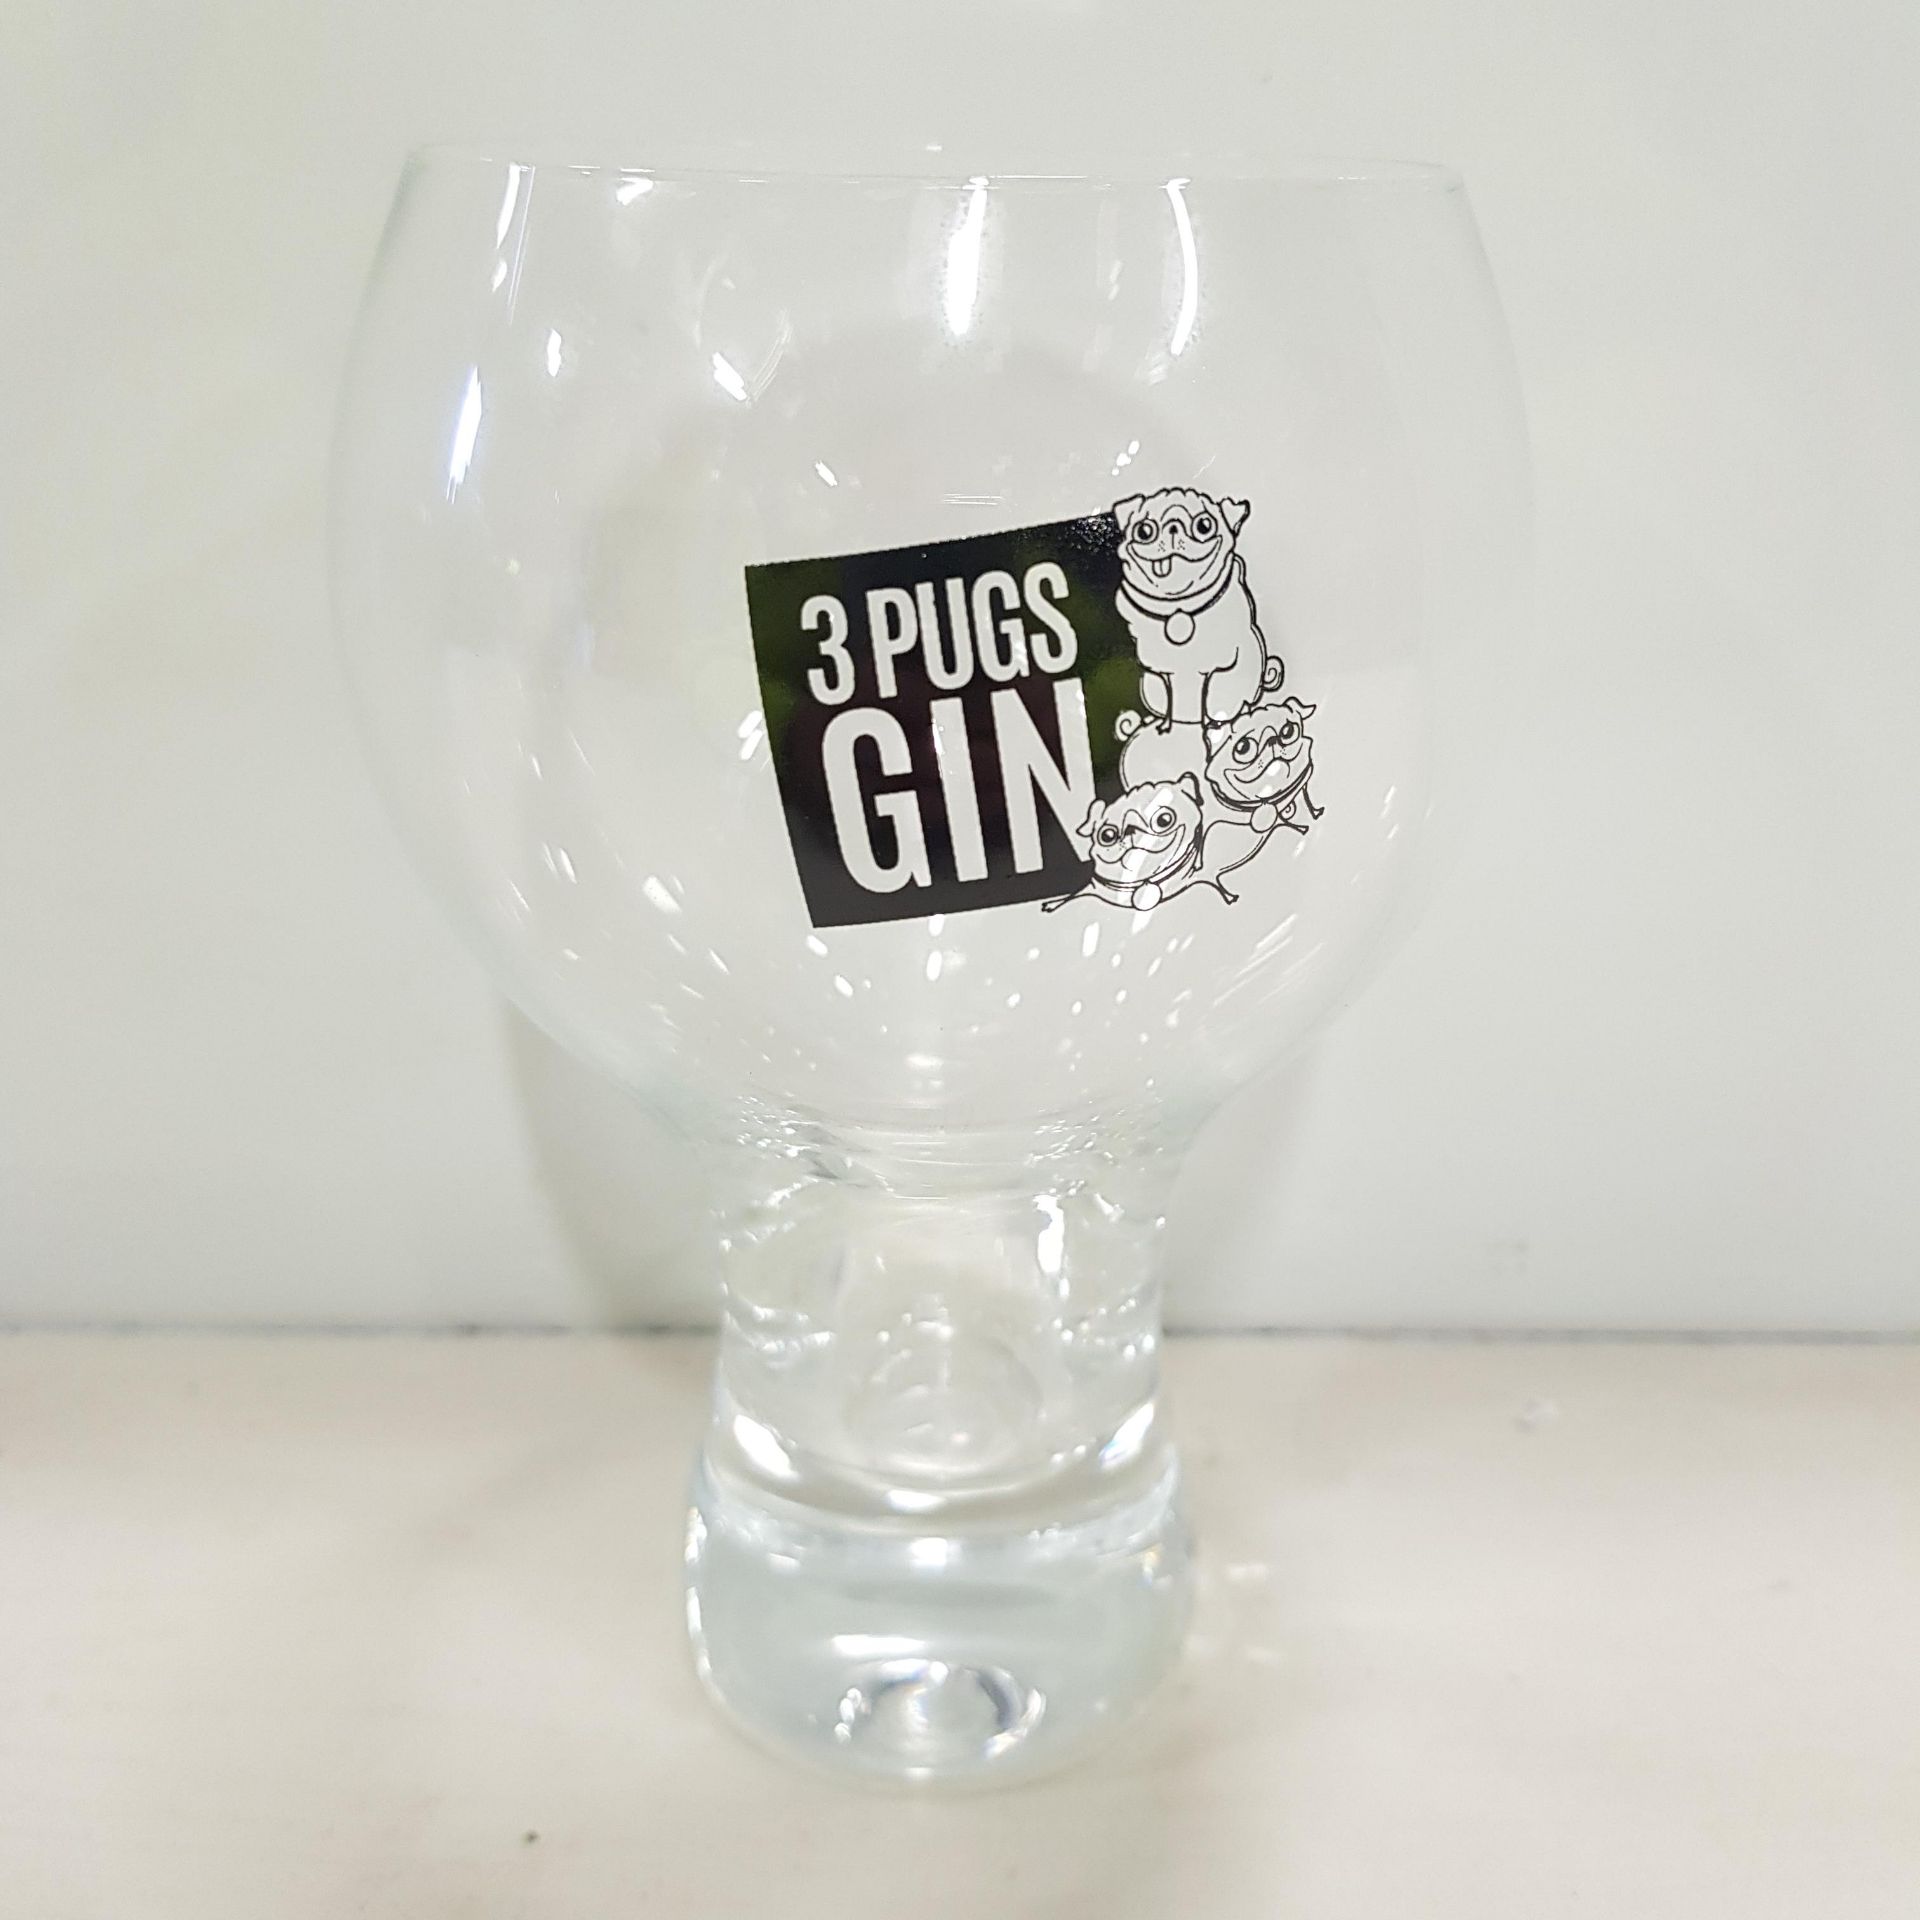 120 X BRAND NEW NEW LORD 3 PUG GIN GLASSES - ( 520 ML ) - IN 20 BOXES